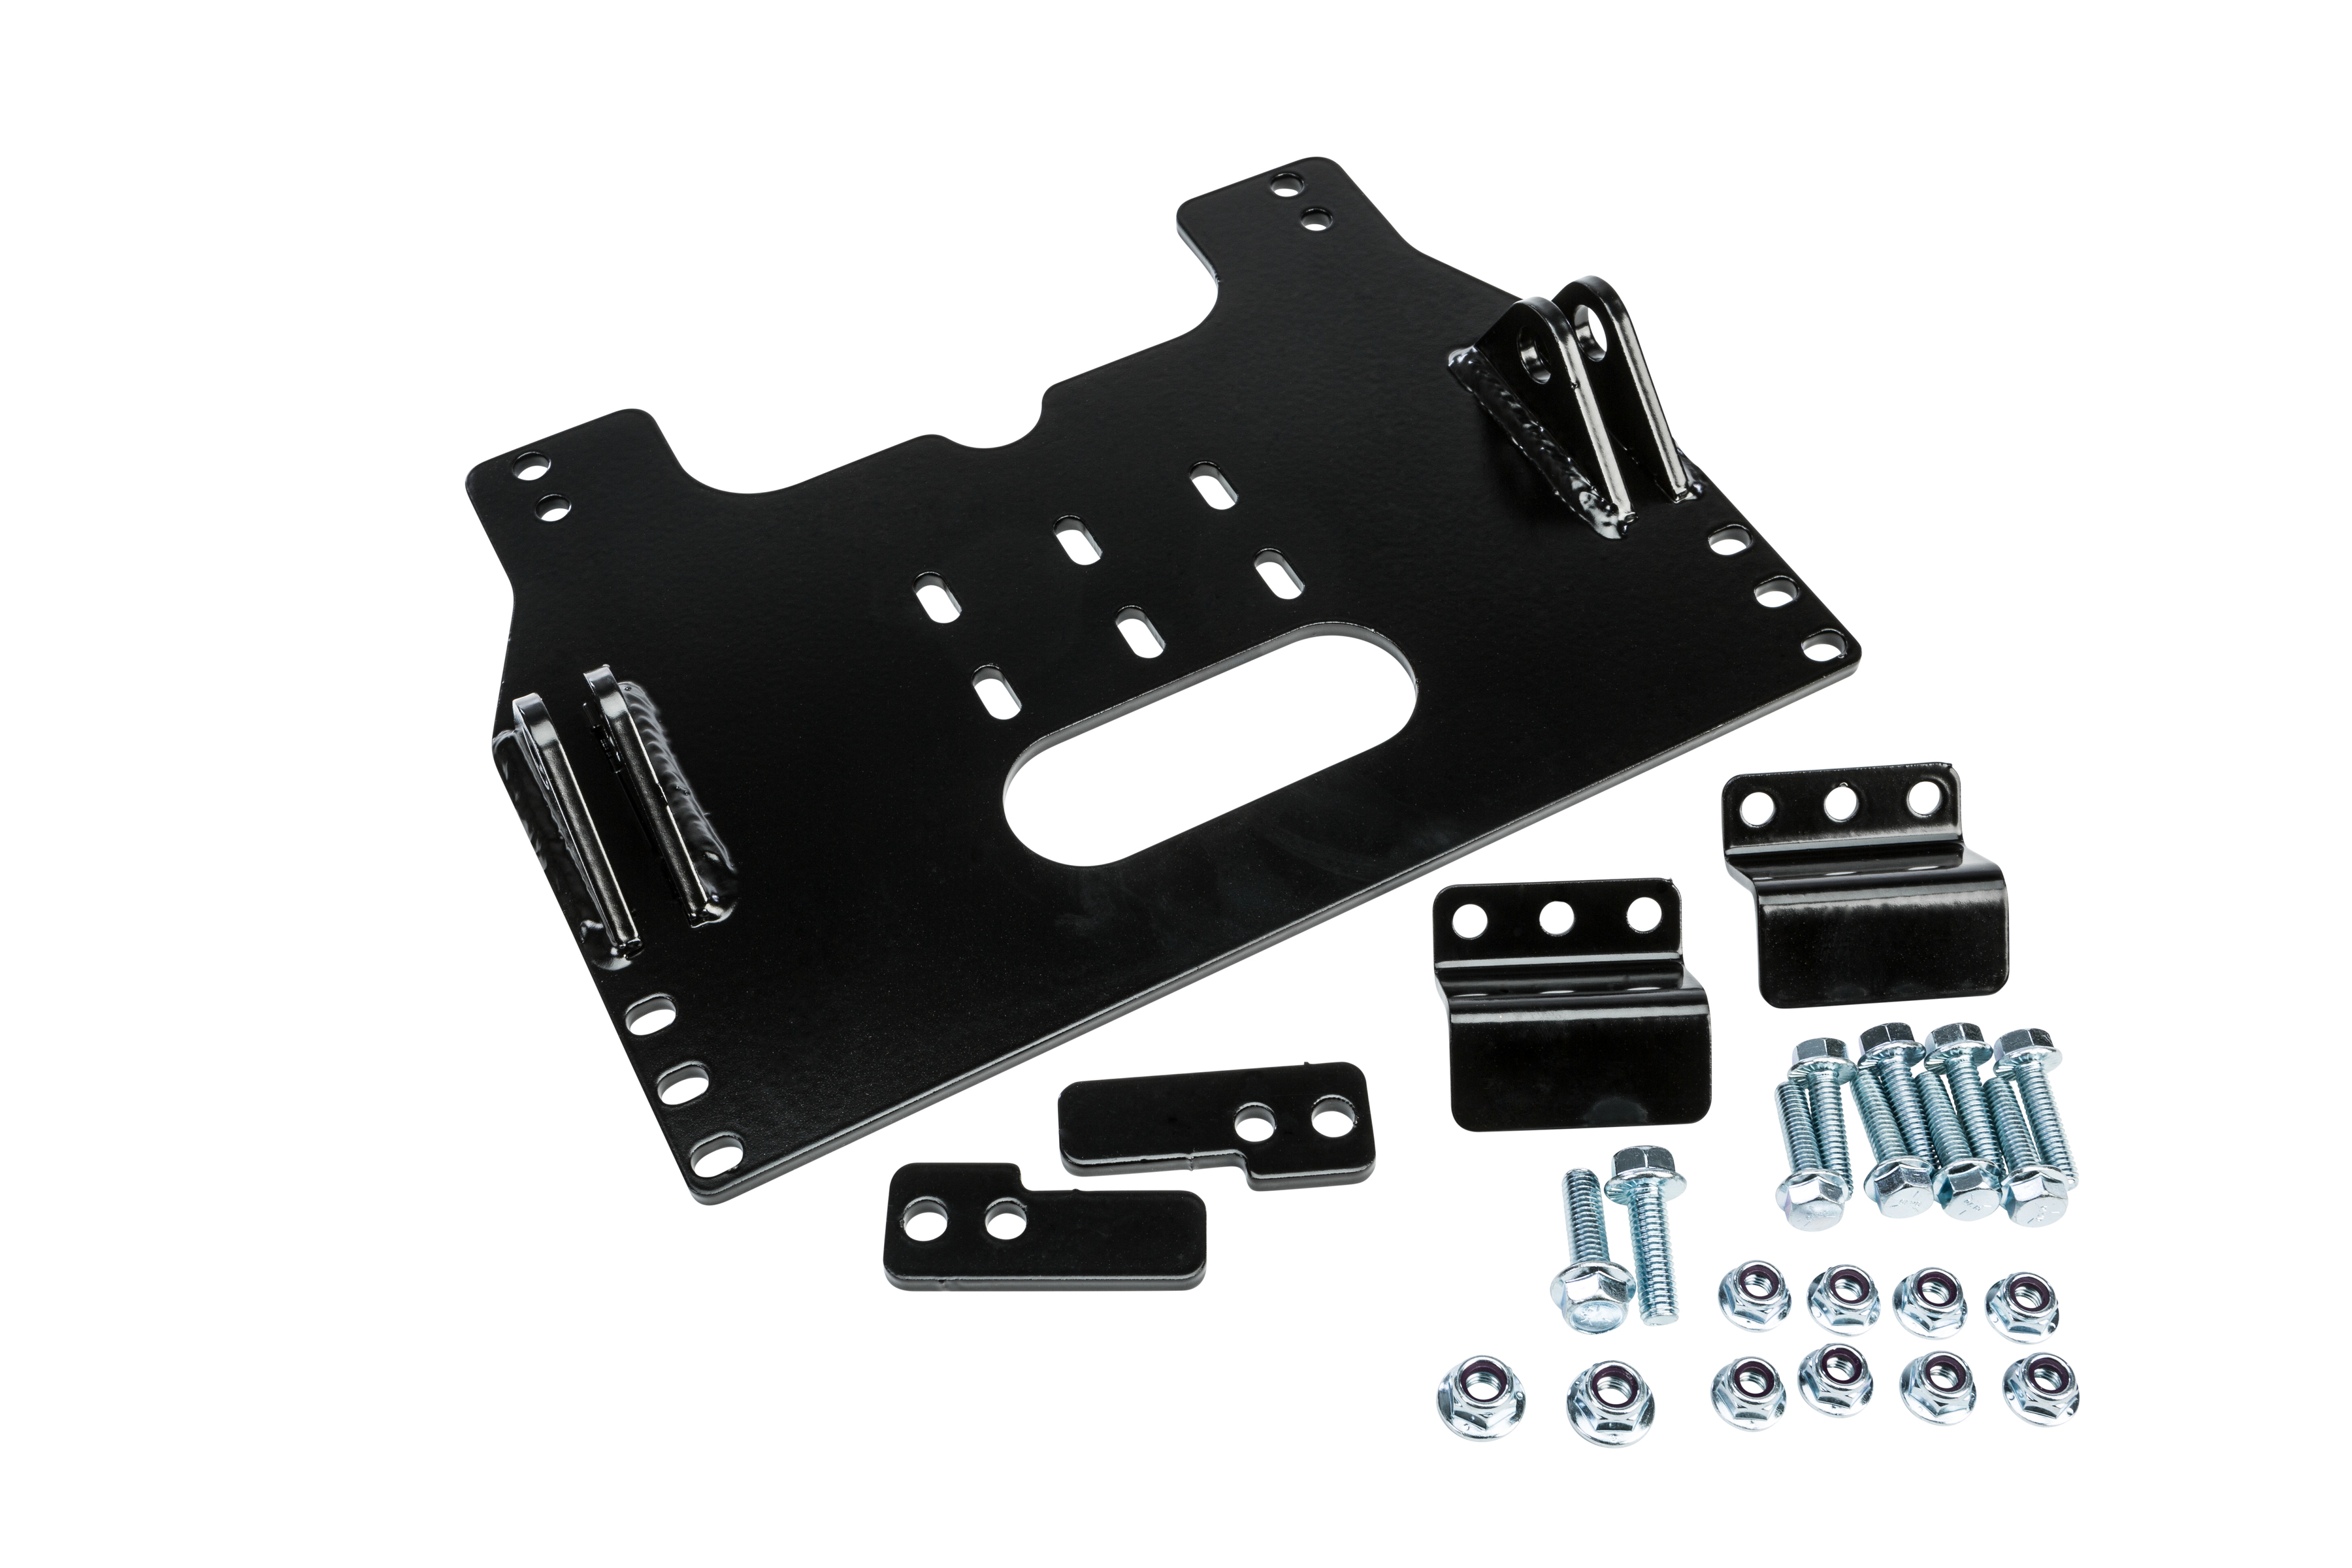 UTV Plow Front Mount Kit - For 16-18 Can-Am Maverick /DPS - Click Image to Close